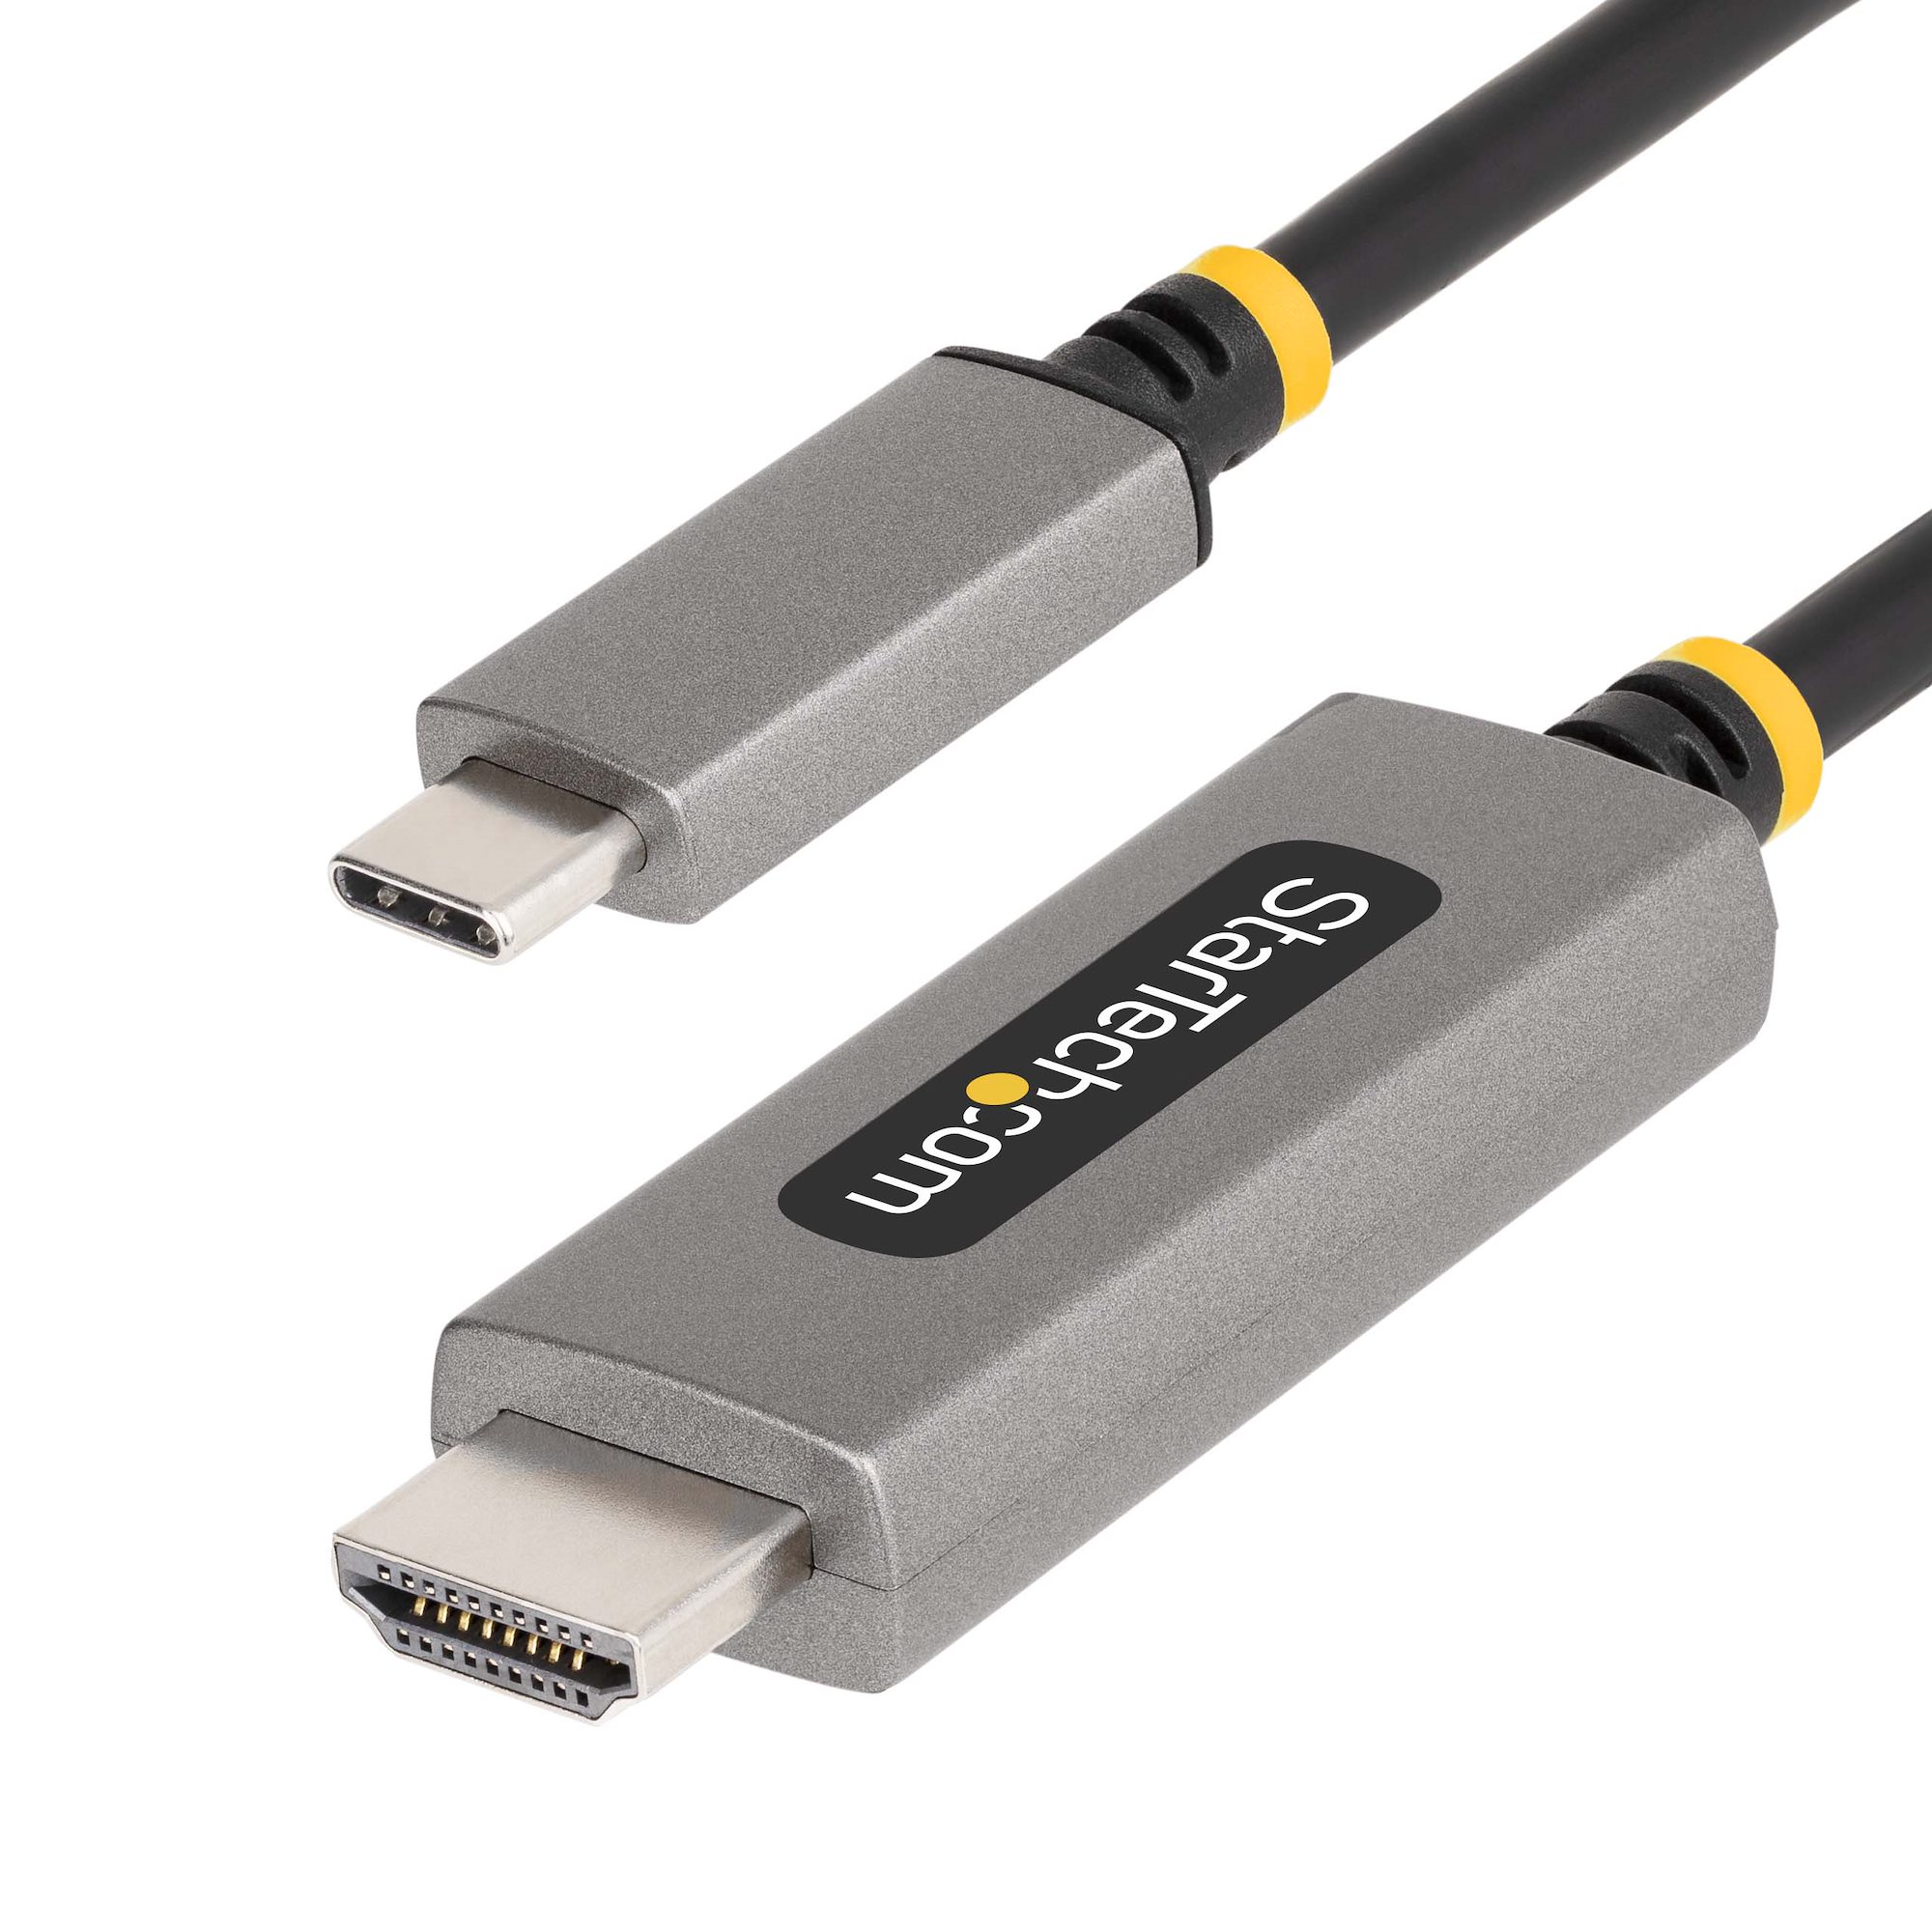 Thunderbolt to HDMI Adapters